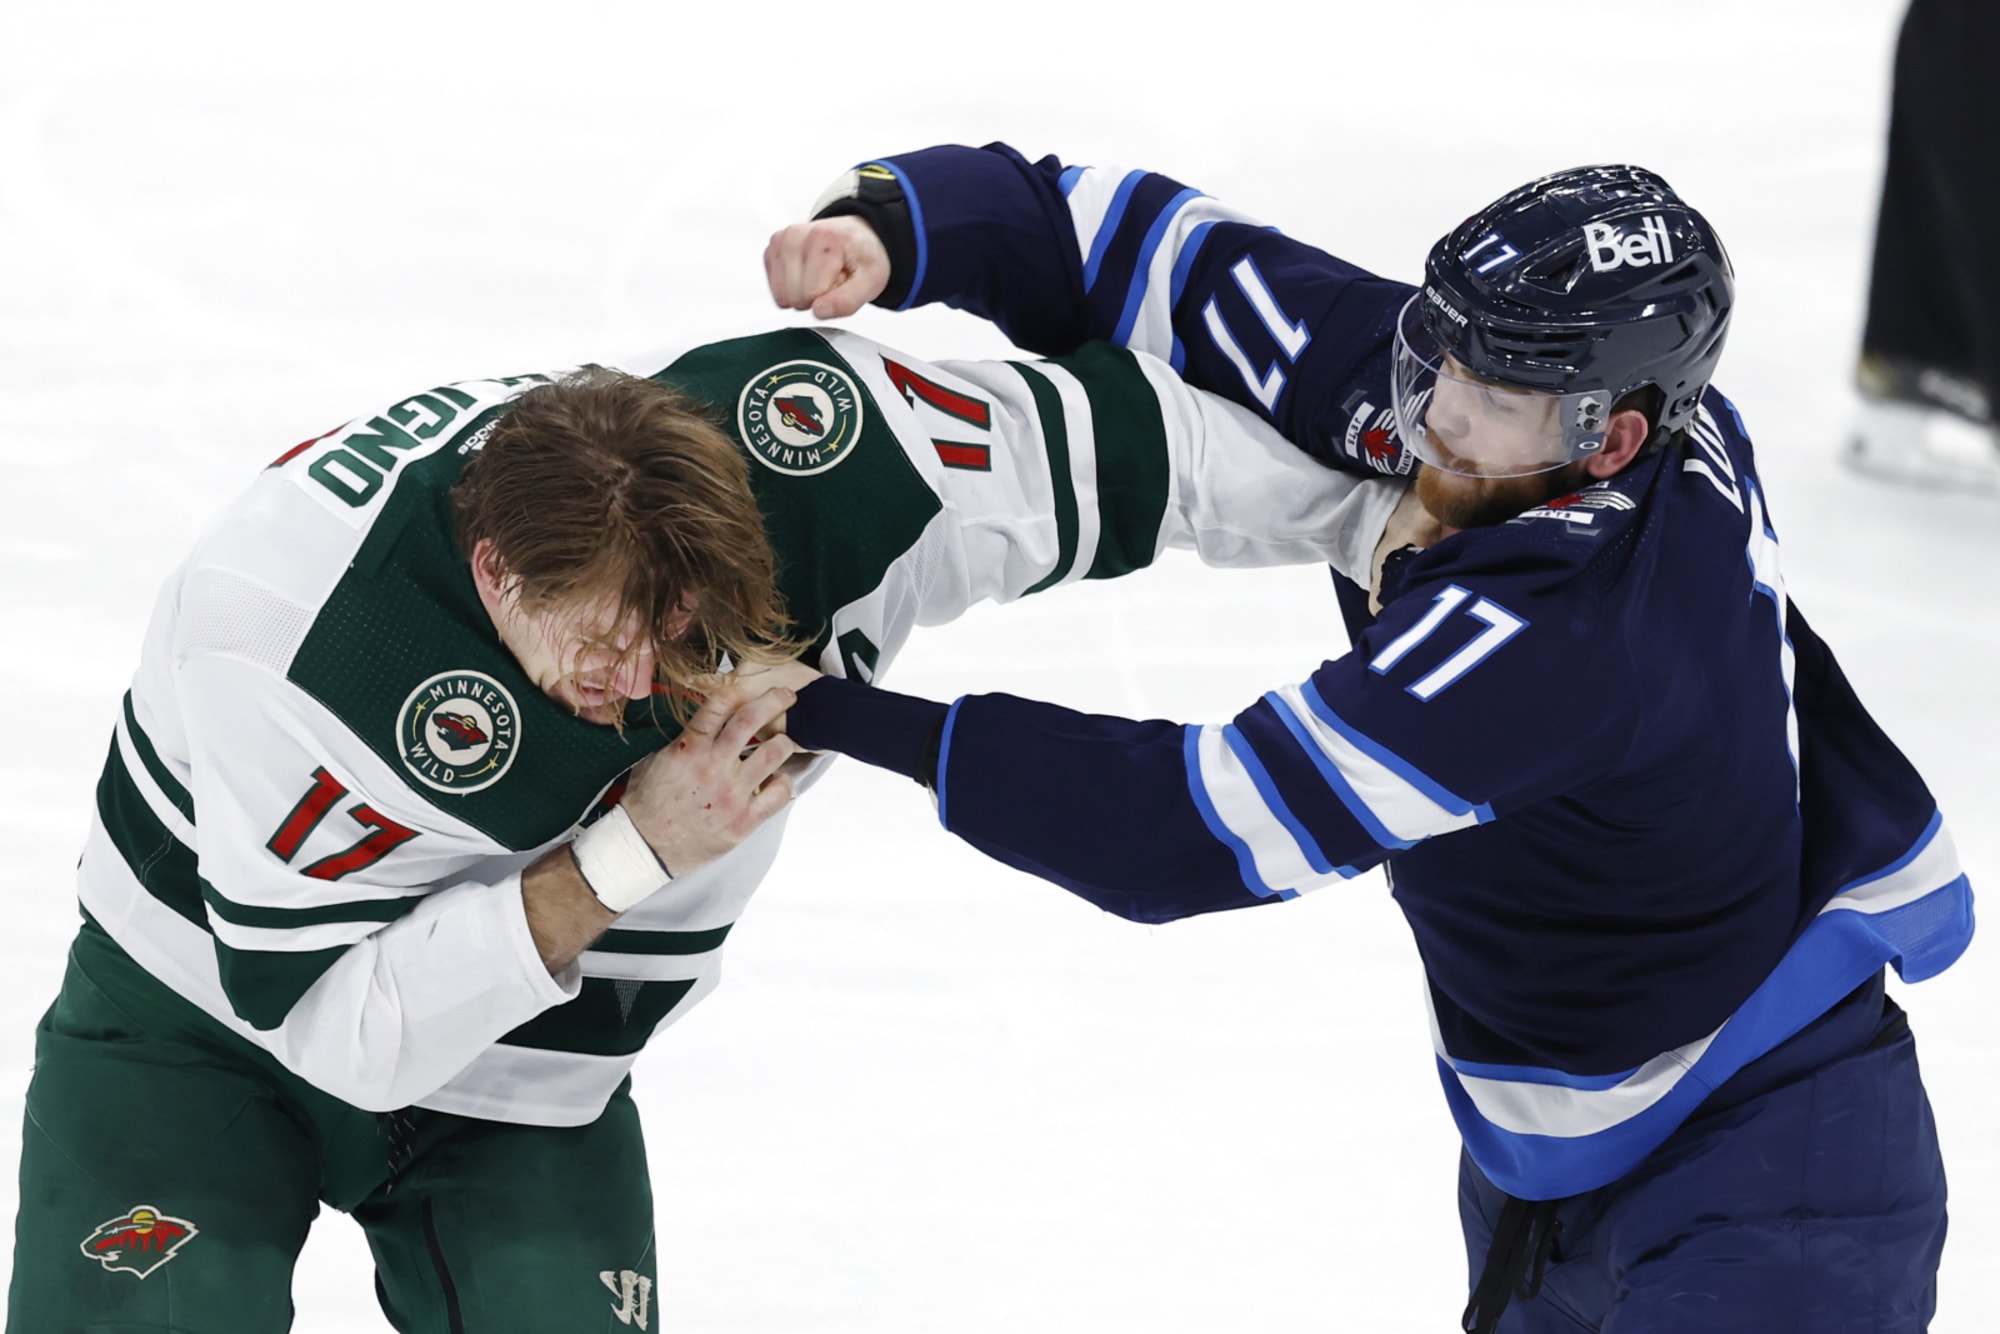 The fight that bonded new Wild teammates Marcus Foligno and Oskar